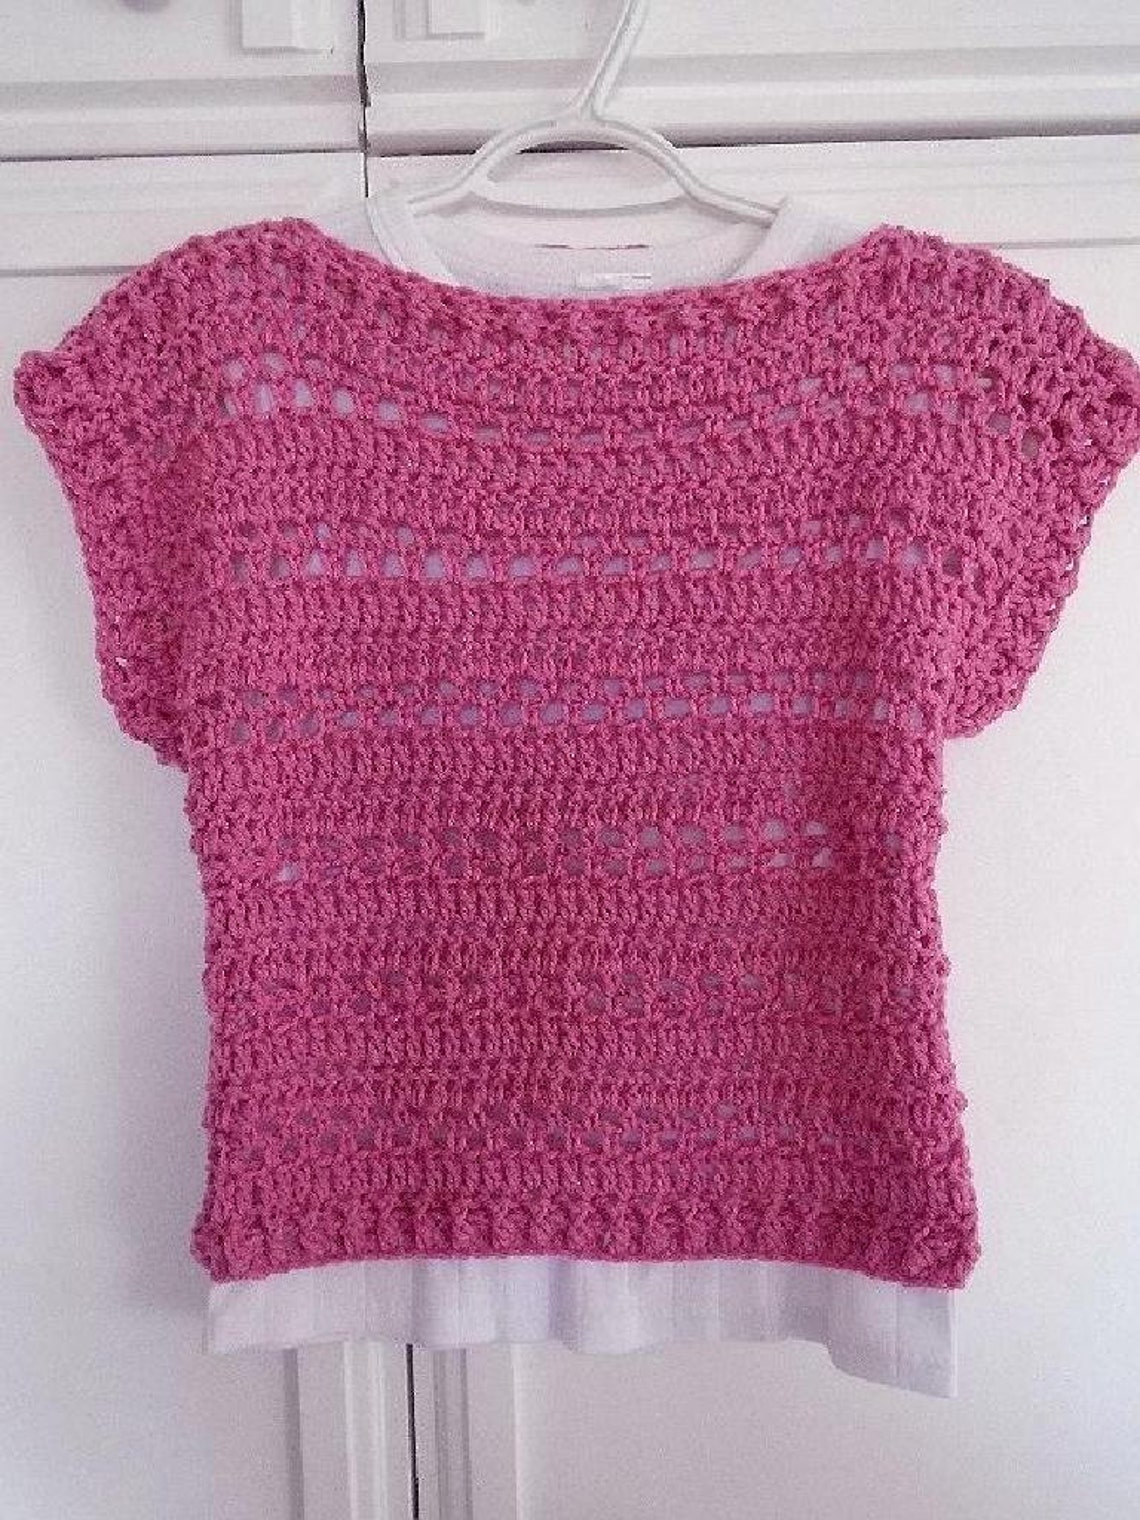 Easy CROCHET SWEATER PATTERN Pink Summer Shell Top 5 yrs to | Etsy